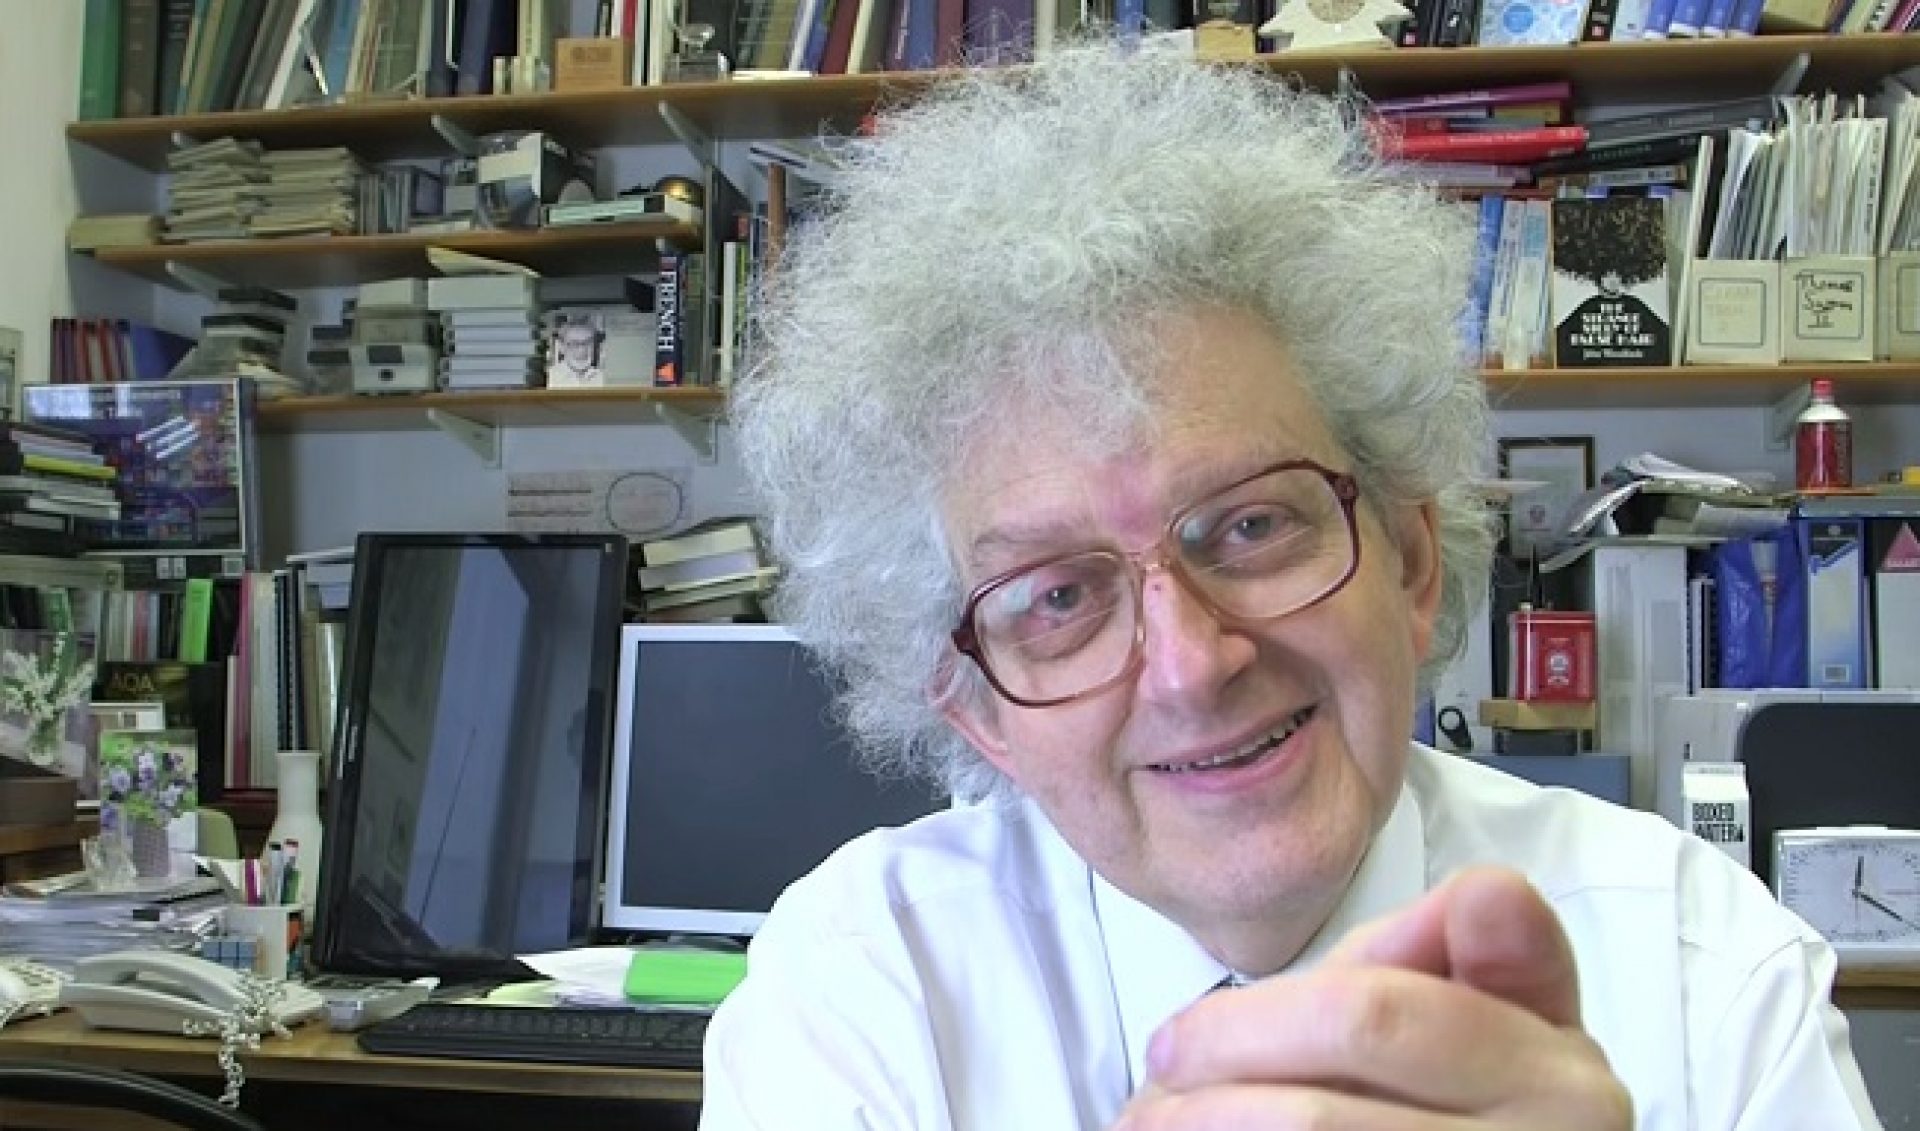 British Professor And YouTuber Martyn Poliakoff Gets Knighted For Work In Science